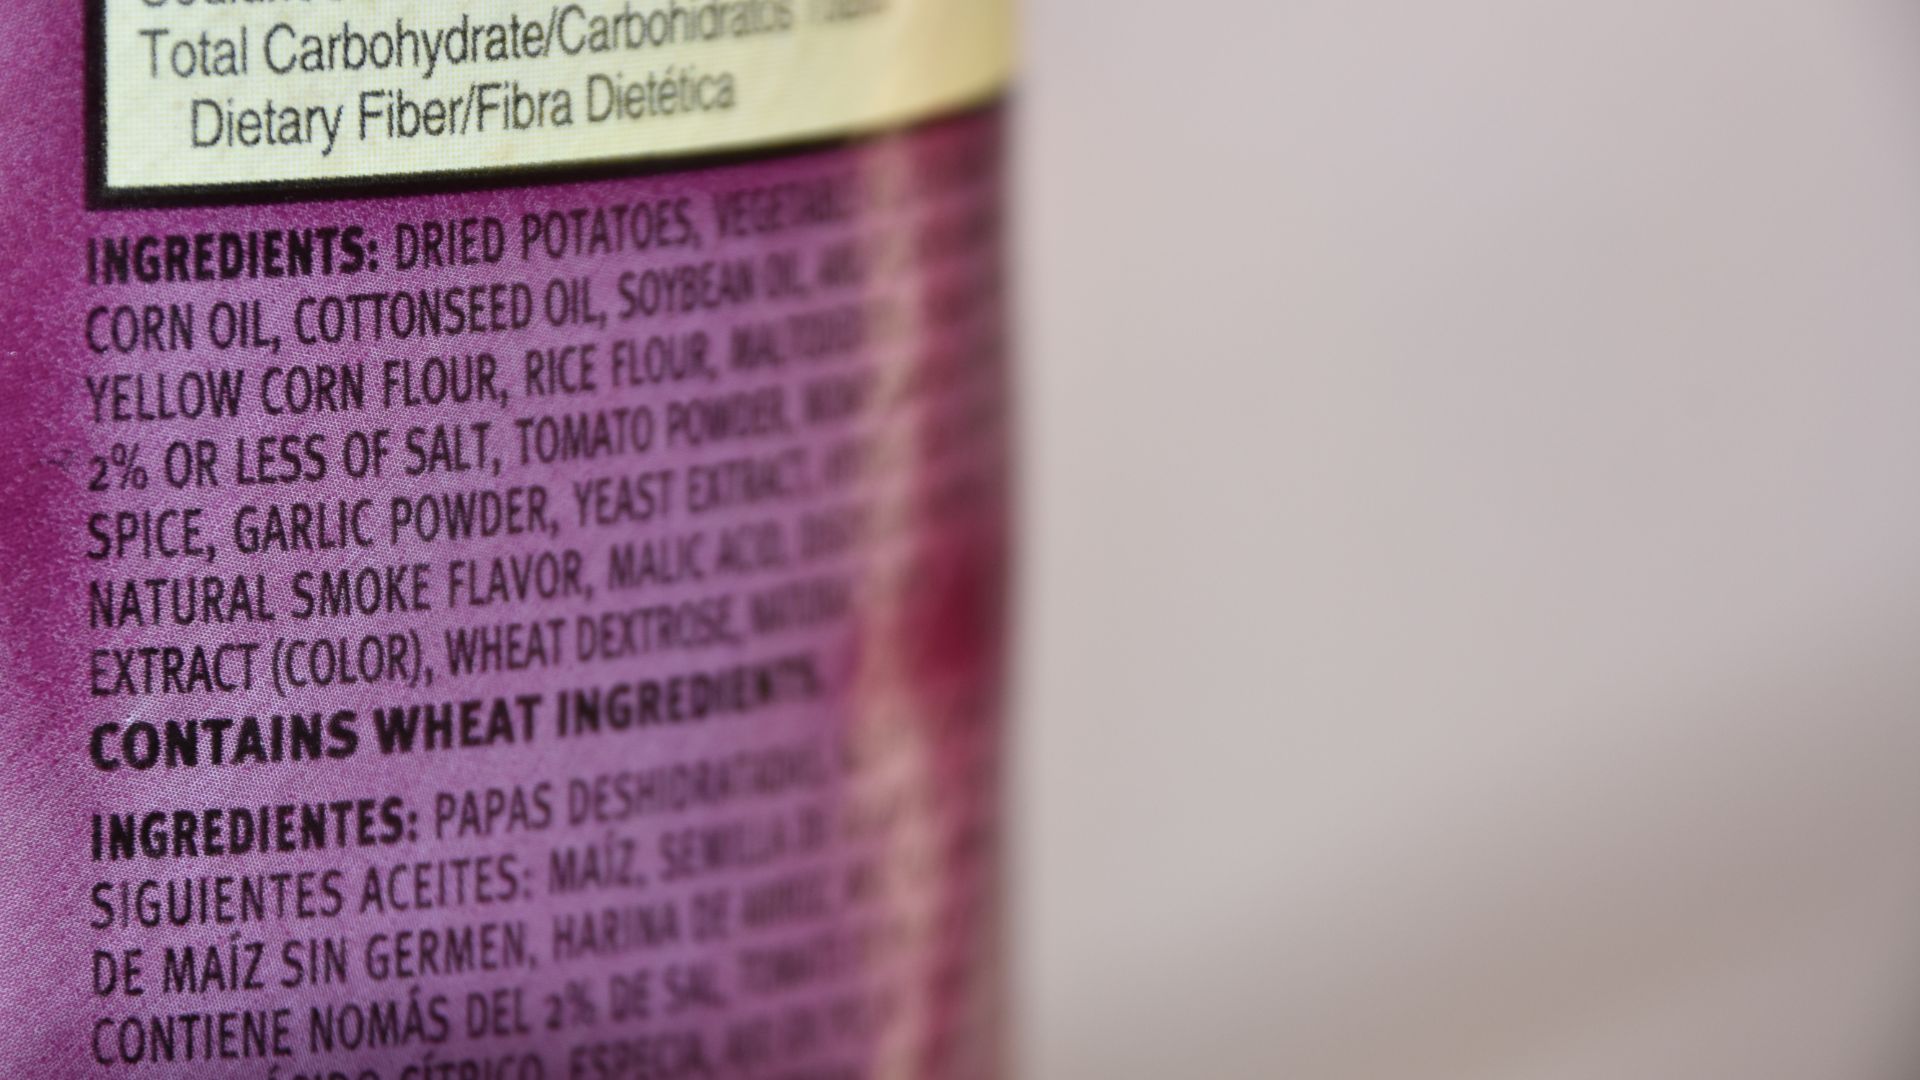 Your ingredients label must list the ingredients in the right order to be FDA-compliant.